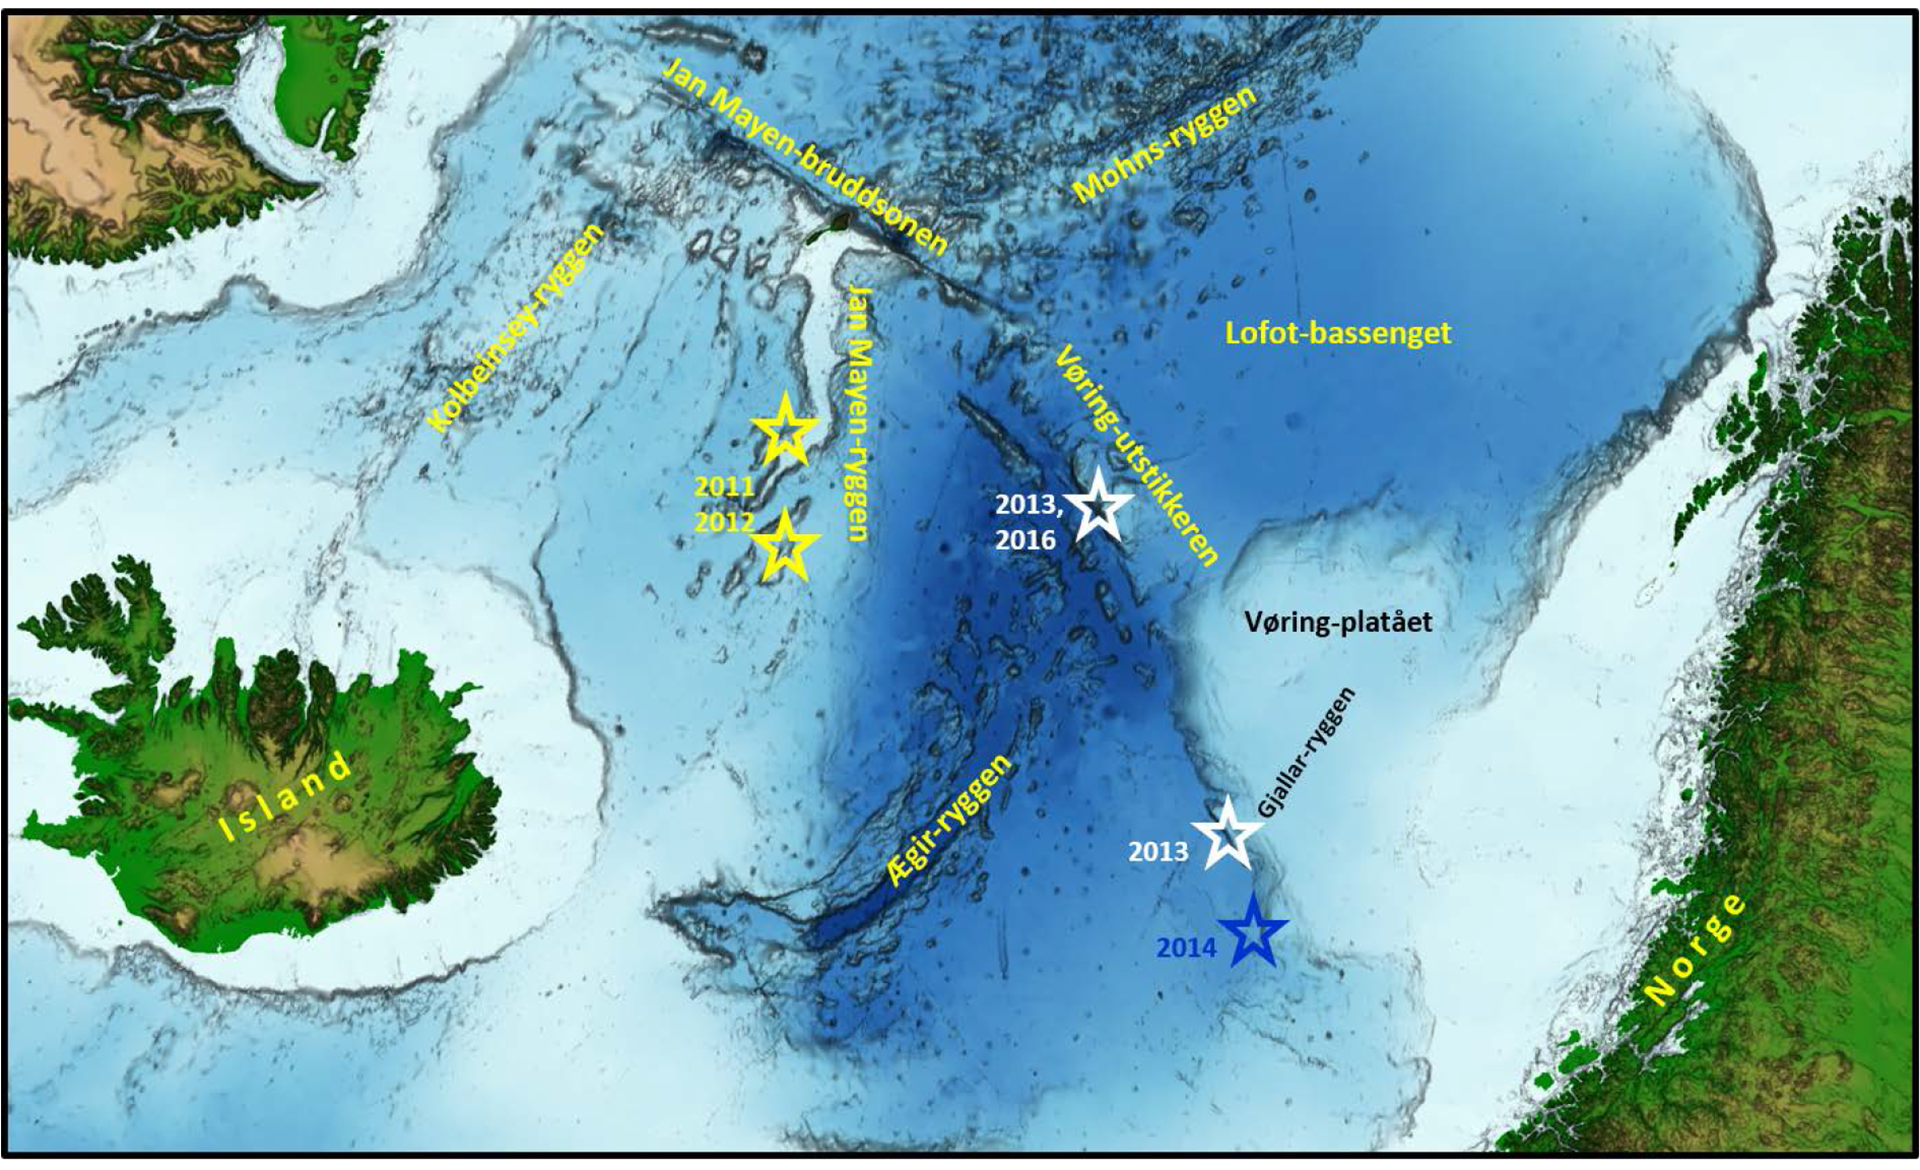 Maps showing the localities of the Norwegian Petroleum Directorate's sampling of solid rock on the seabed.